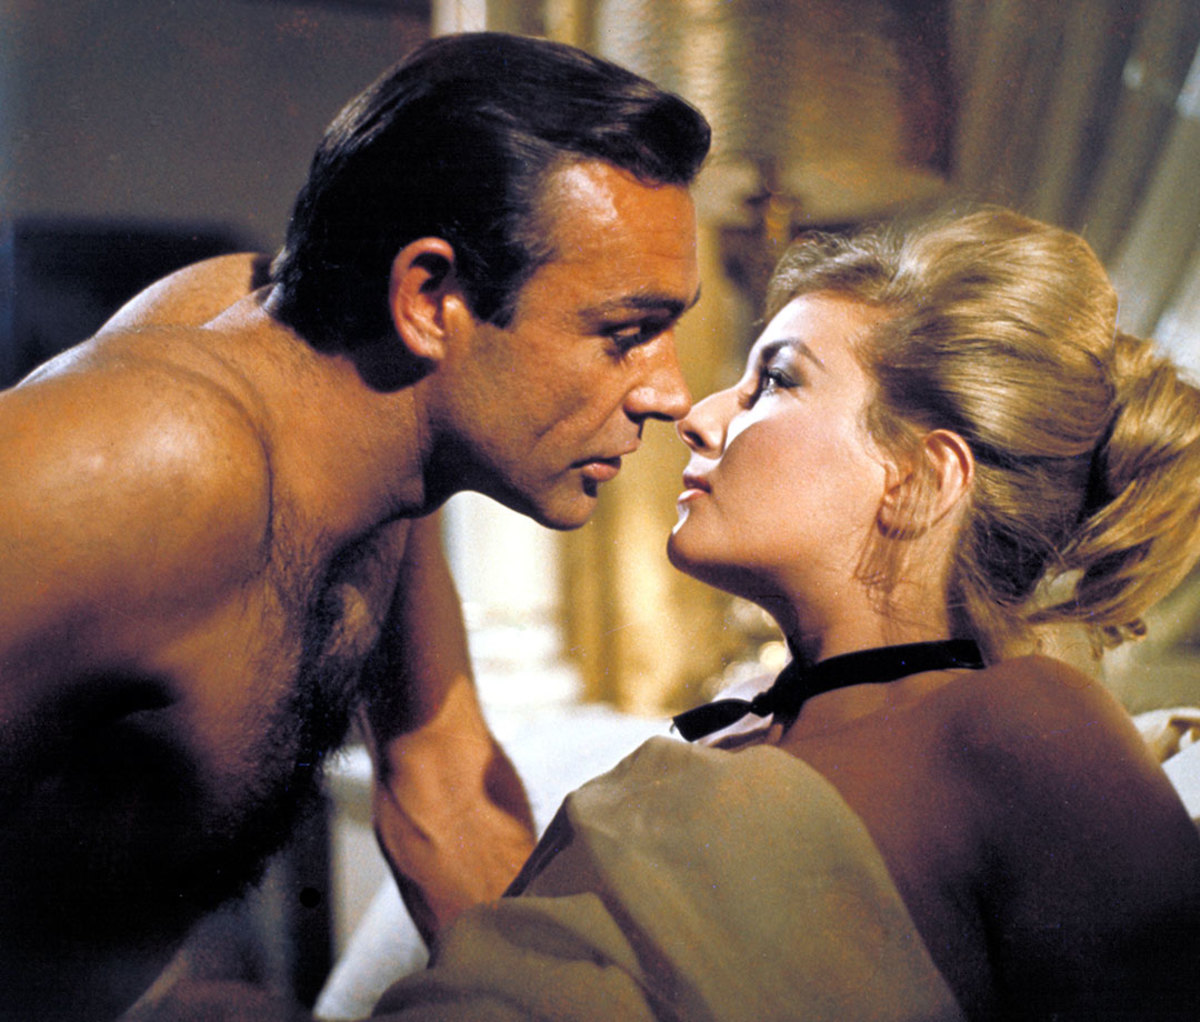 Sean Connery and Daniela Bianchi in 'From Russia With Love'